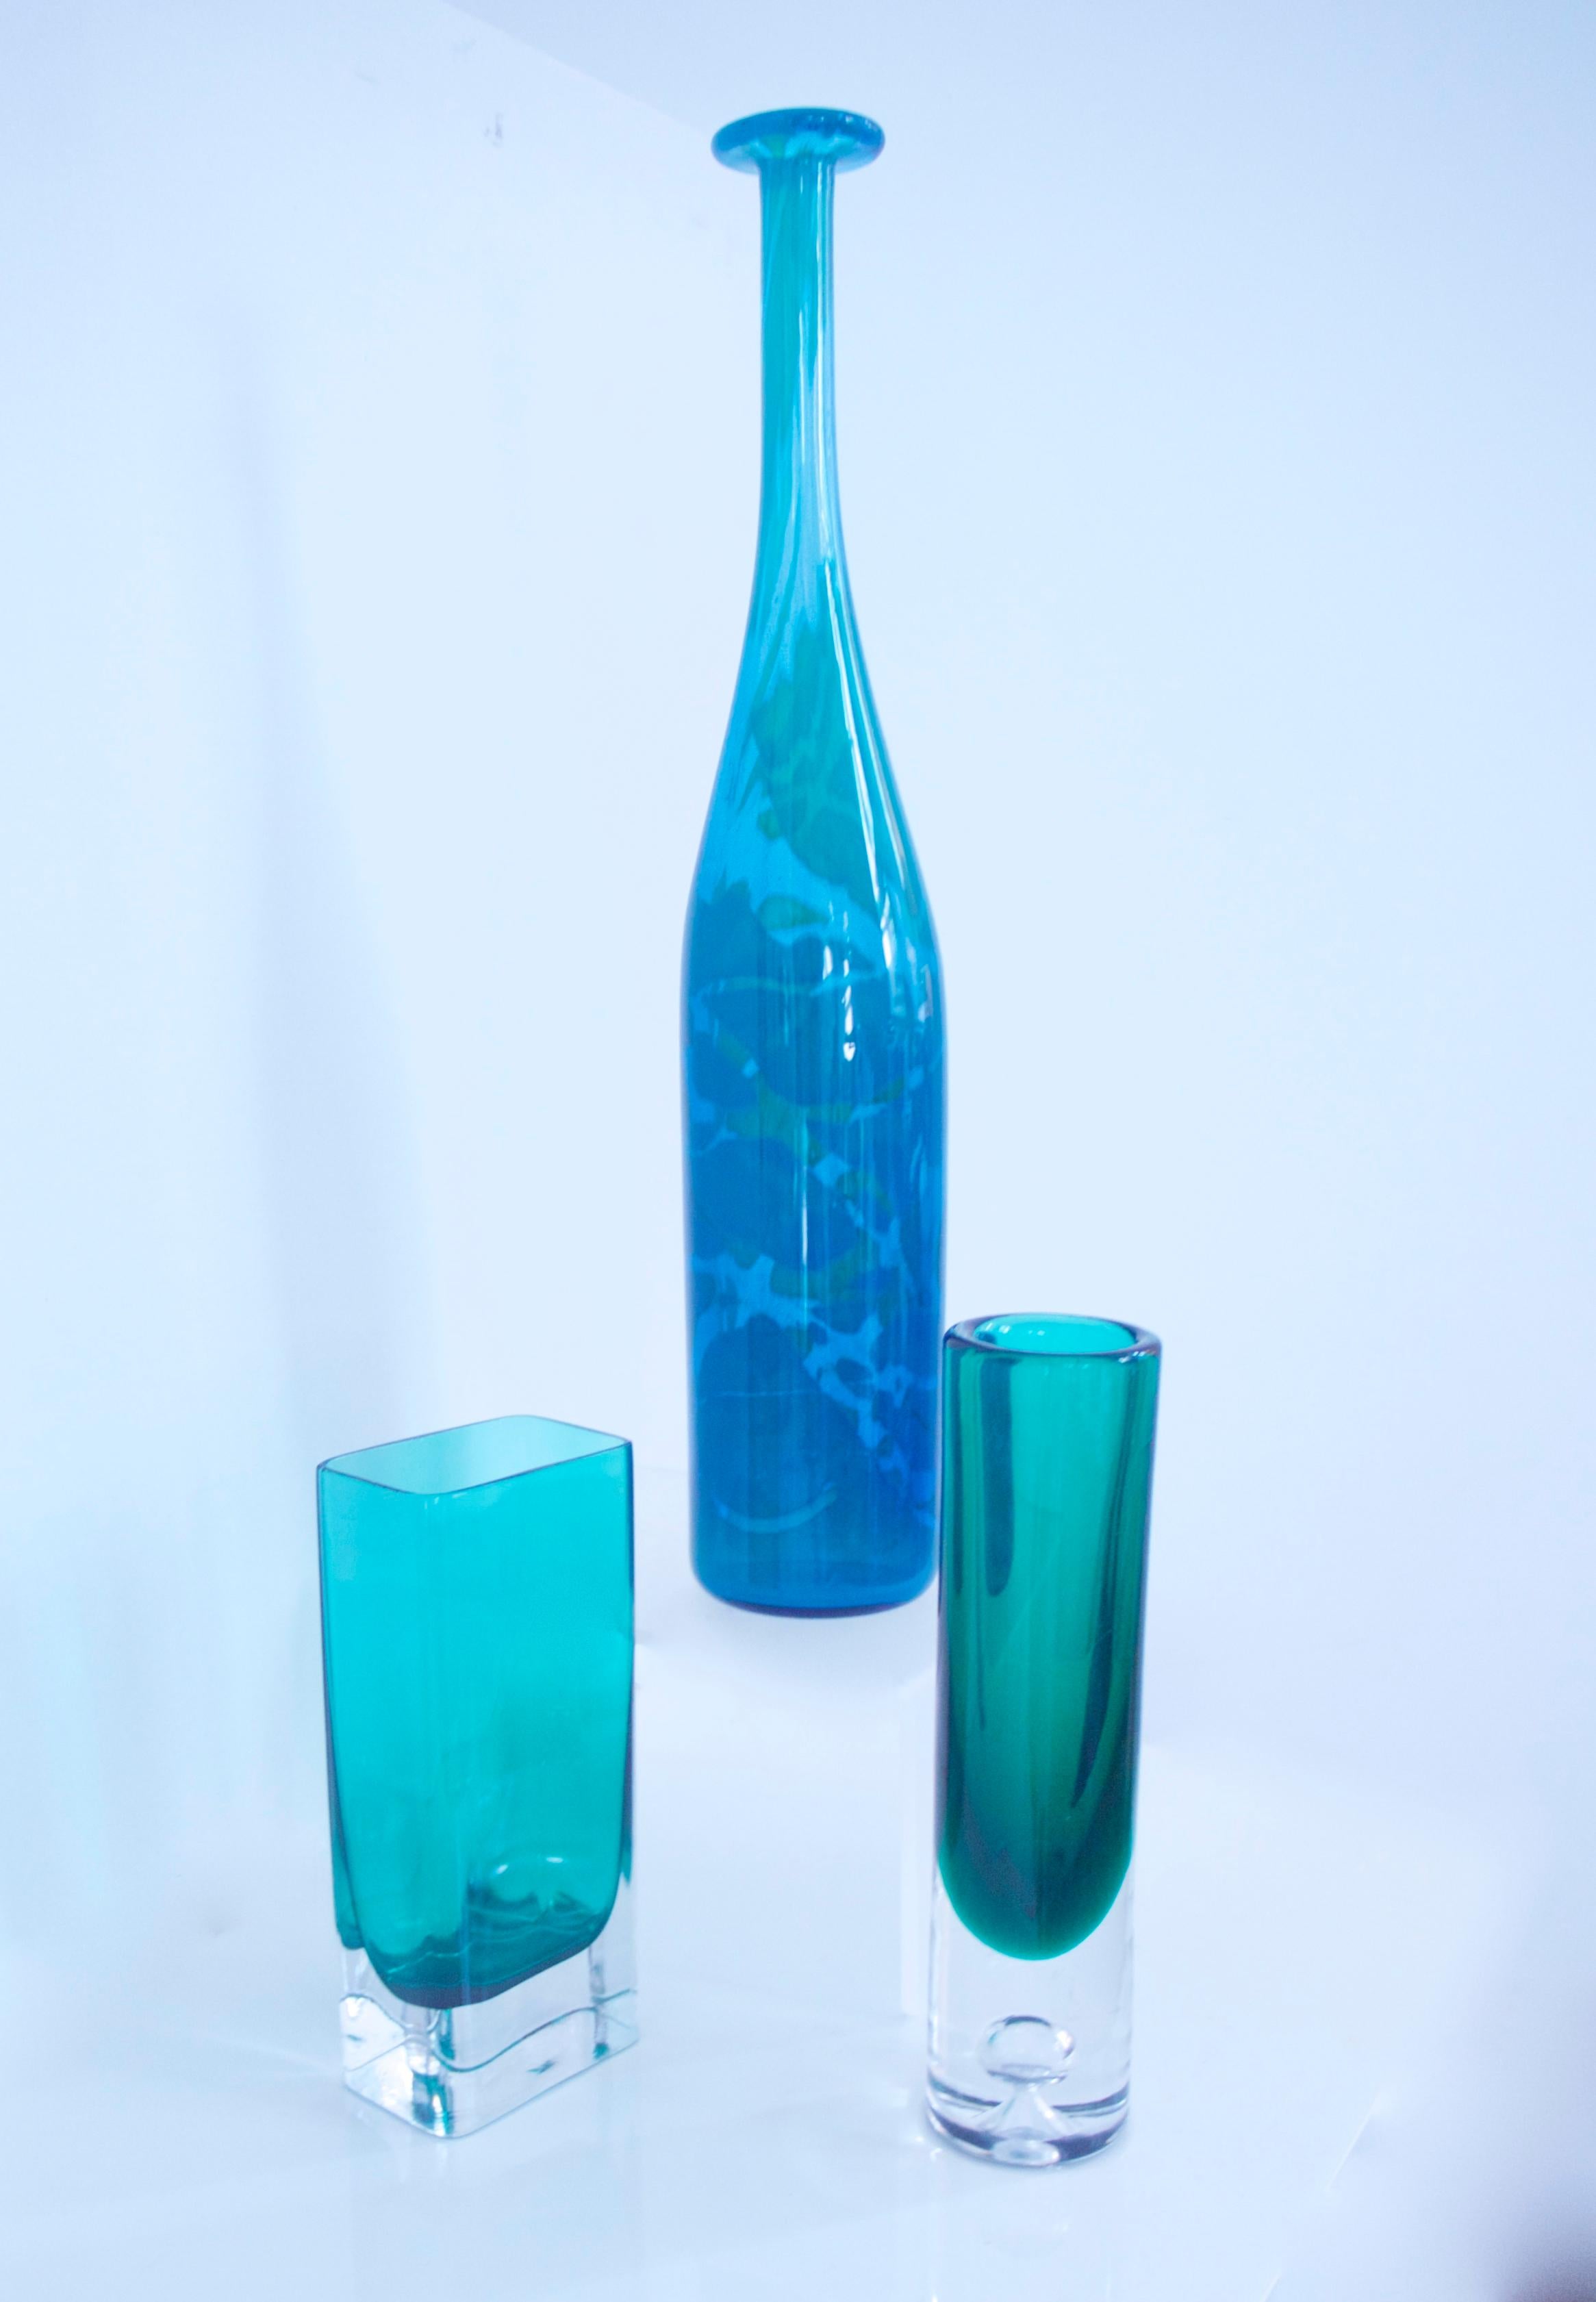 Art Glass Pair of Scandinavian Modern Vases by Riihimaki, Finland, Late 1950s For Sale